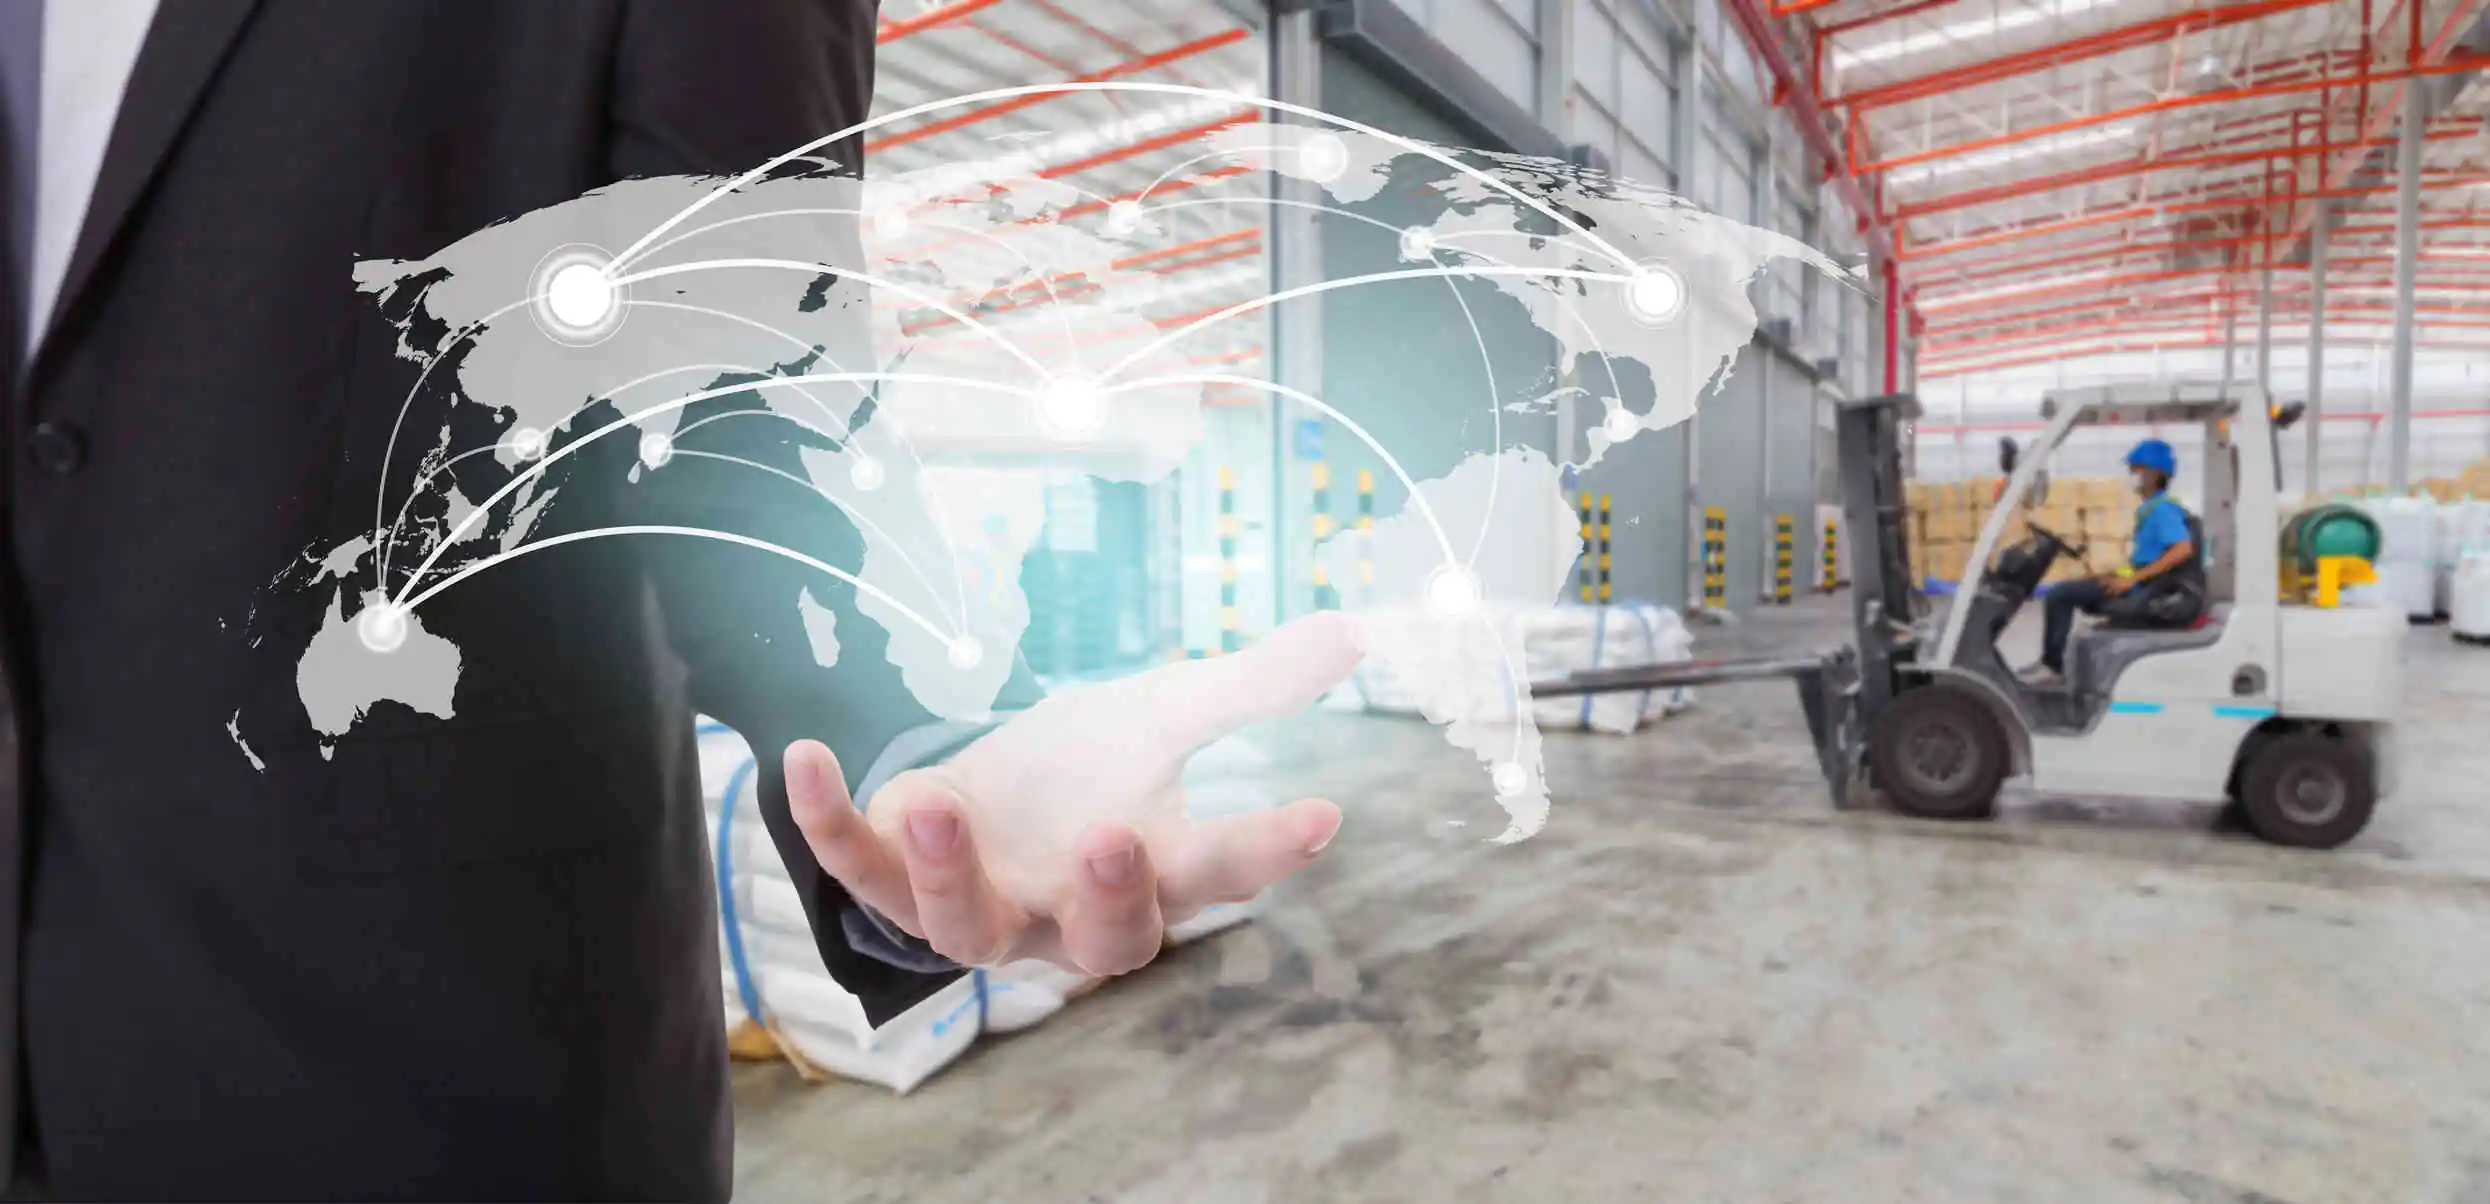 Global-IoT-Market-in-Warehouse-Management